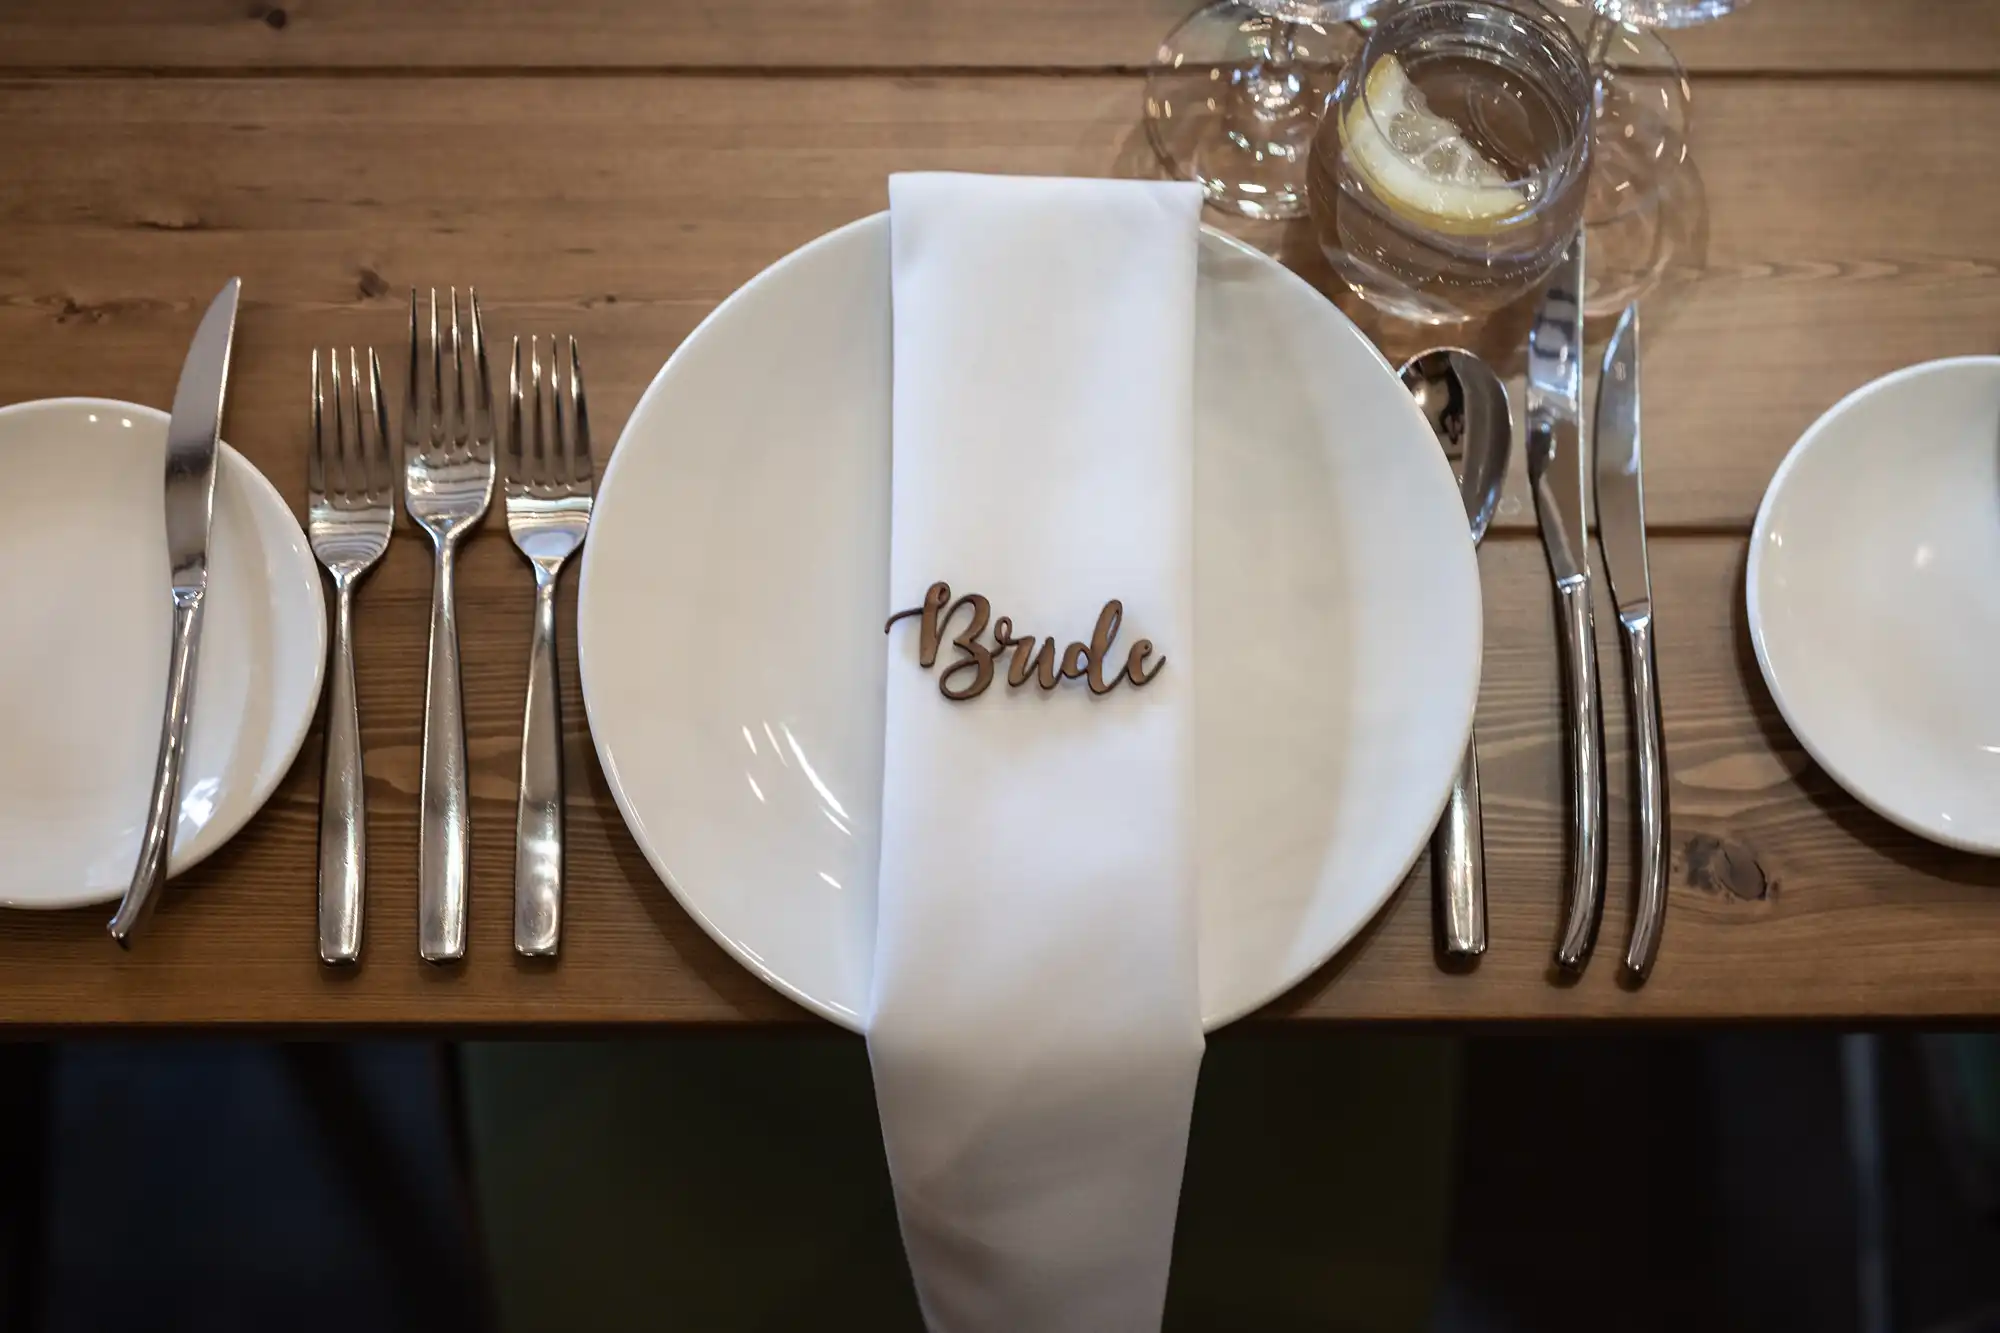 An elegant wedding table setting featuring a plate with a napkin embroidered with the word "Bride," surrounded by silverware and glasses.